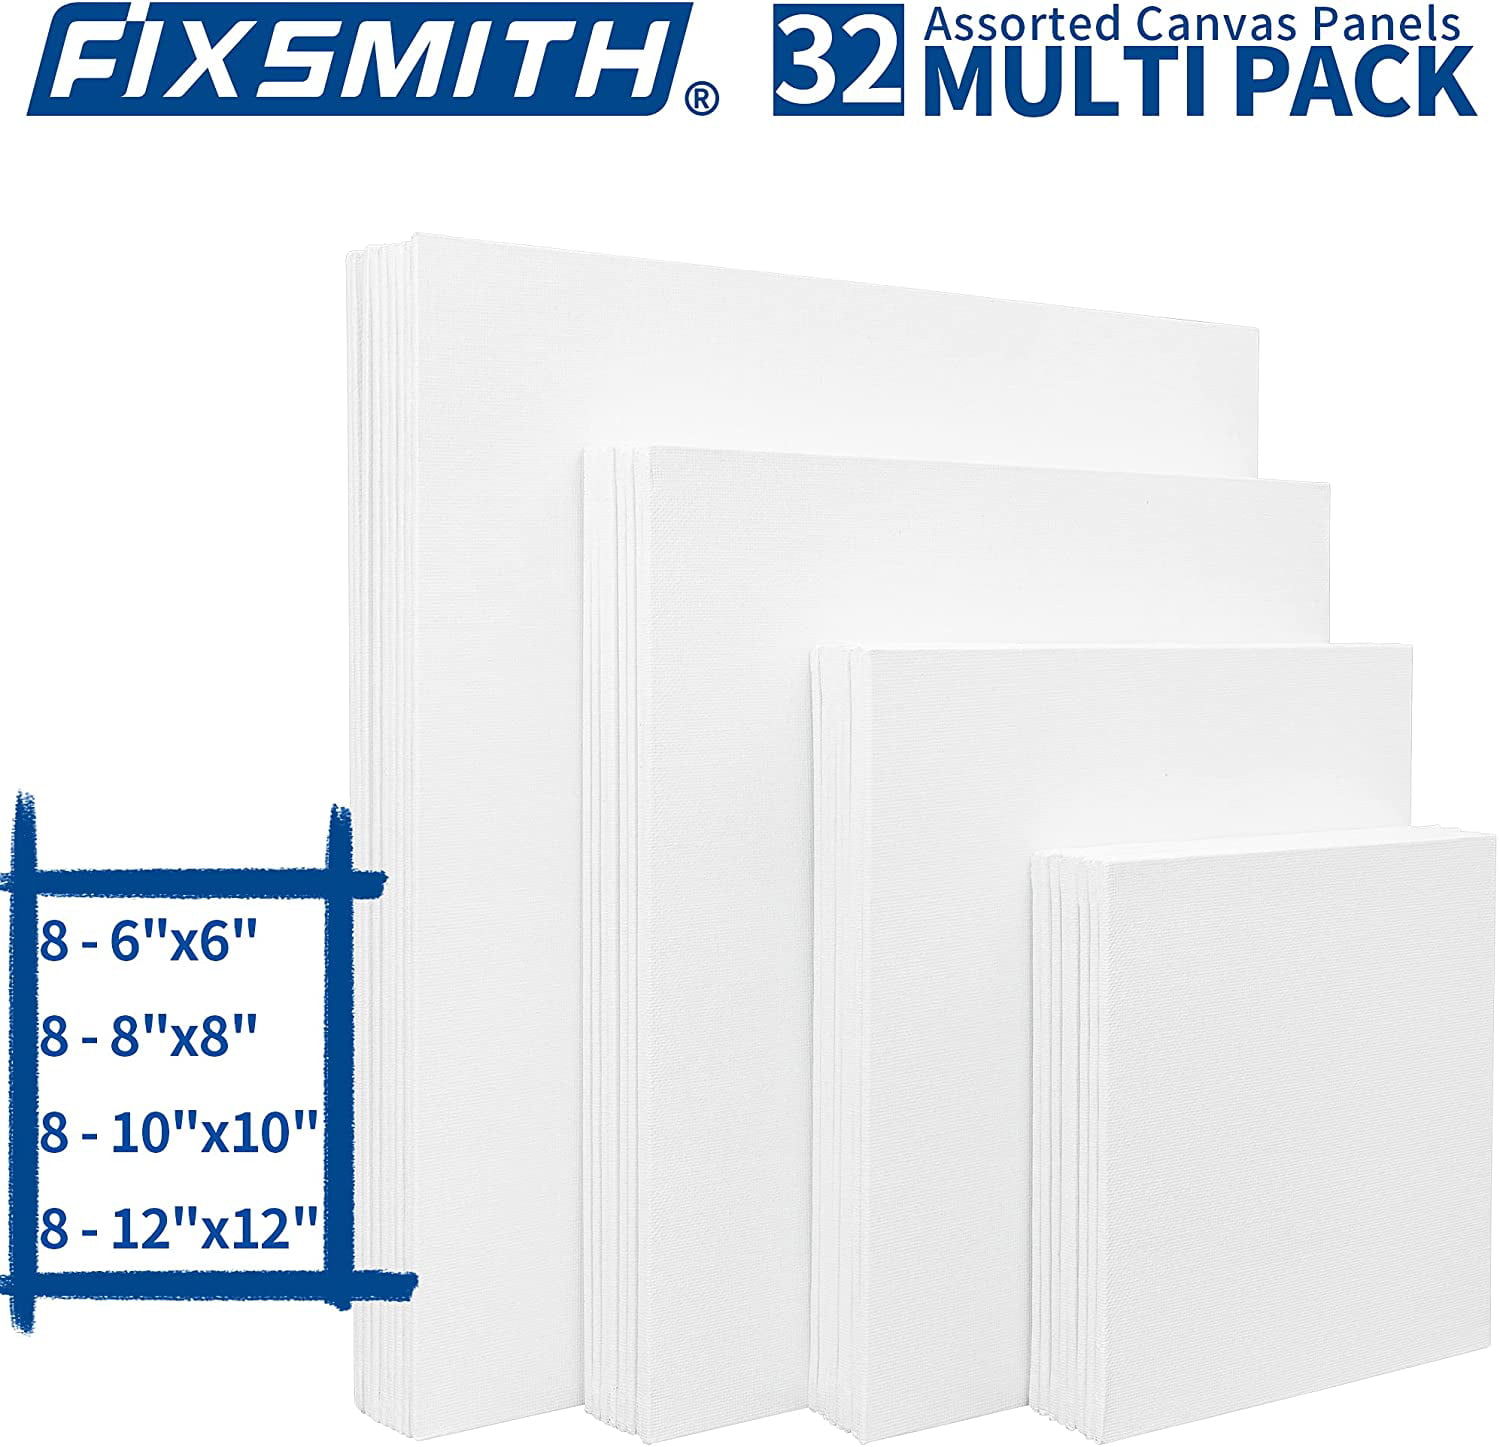 FIXSMITH 21 Pack Stretched Canvases, Multi Pack - 4x4, 5x7, 8x10, 9x12,  11x14, Round Canvas 12x12, 8x8 (3 of Each), 100% Cotton, Primed Canvases  for Acrylic, Oil, Wet or Dry Art Media - Yahoo Shopping